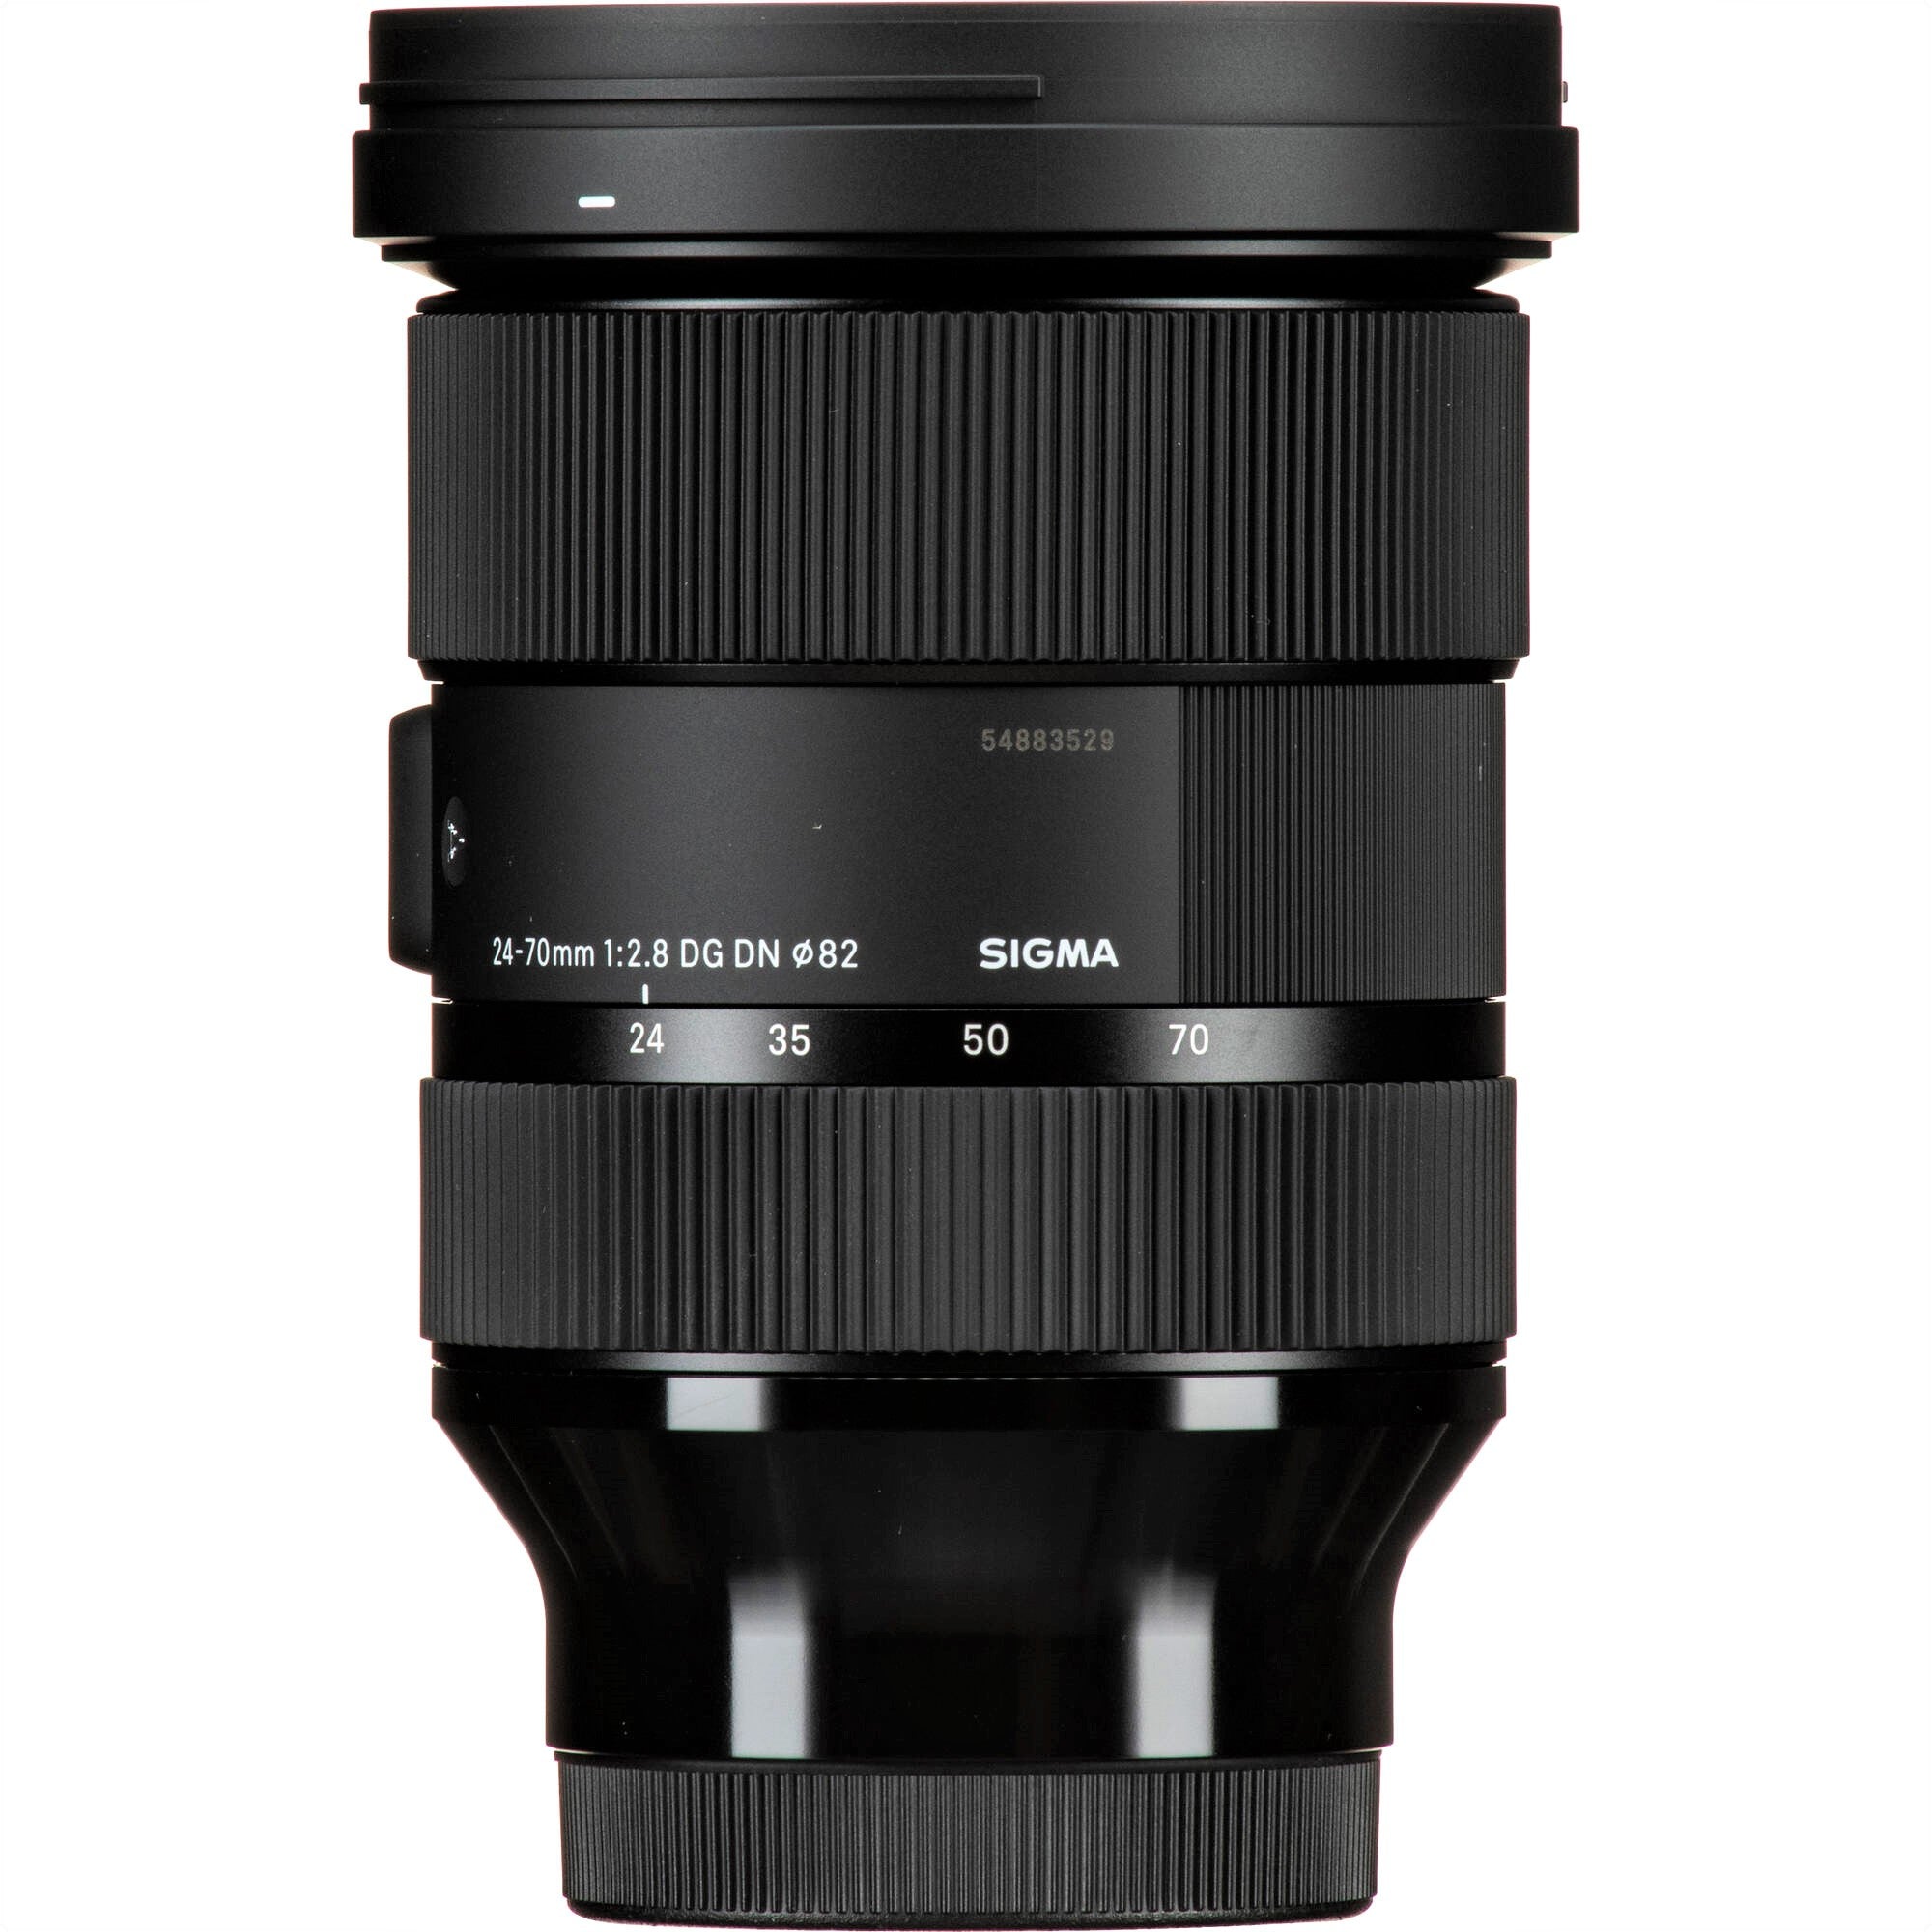 SIGMA 24-70MM F/2.8 DG DN ART REVIEW (FOR SONY)